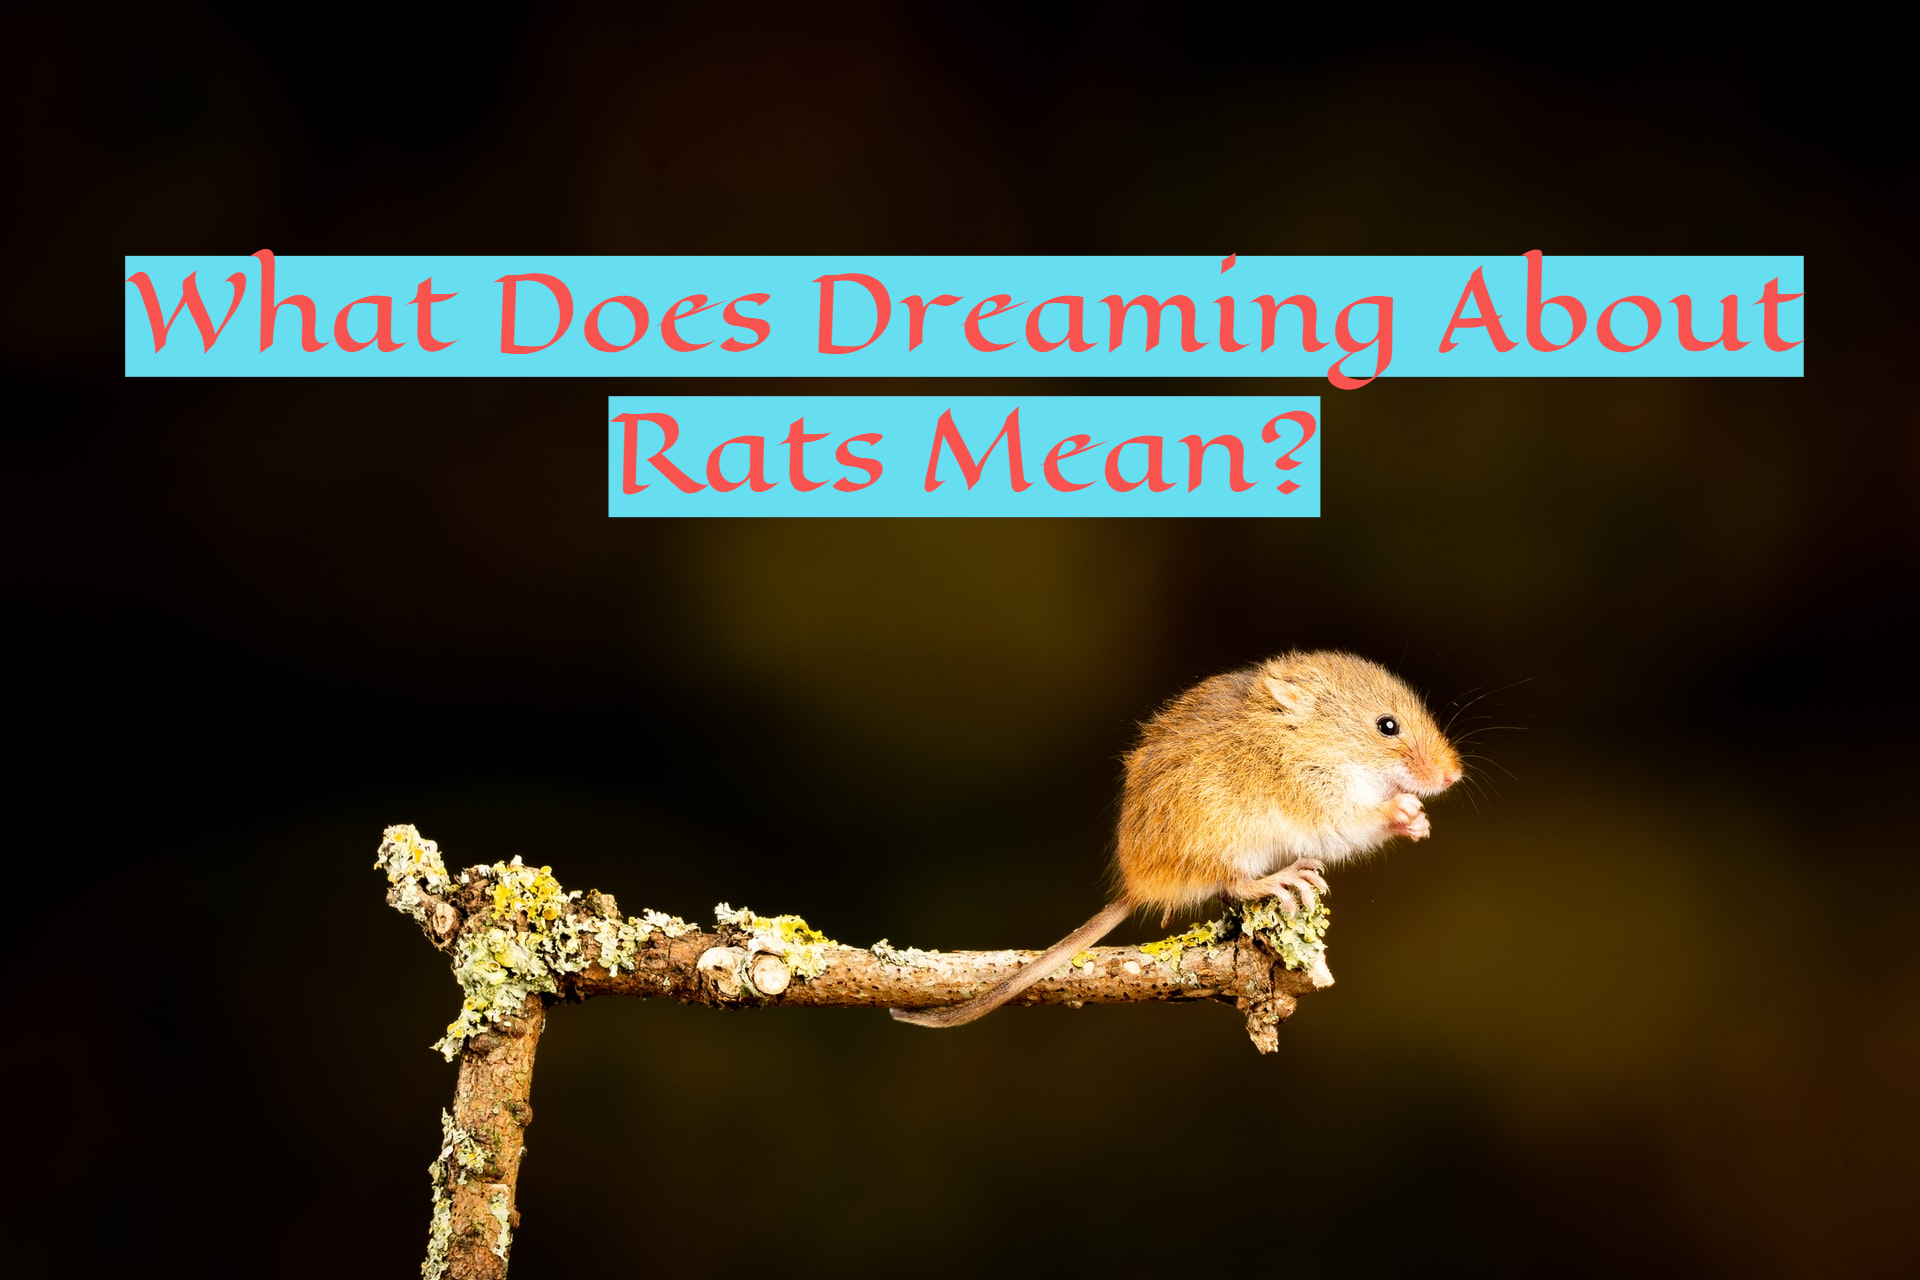 What Does Dreaming About Rats Mean?